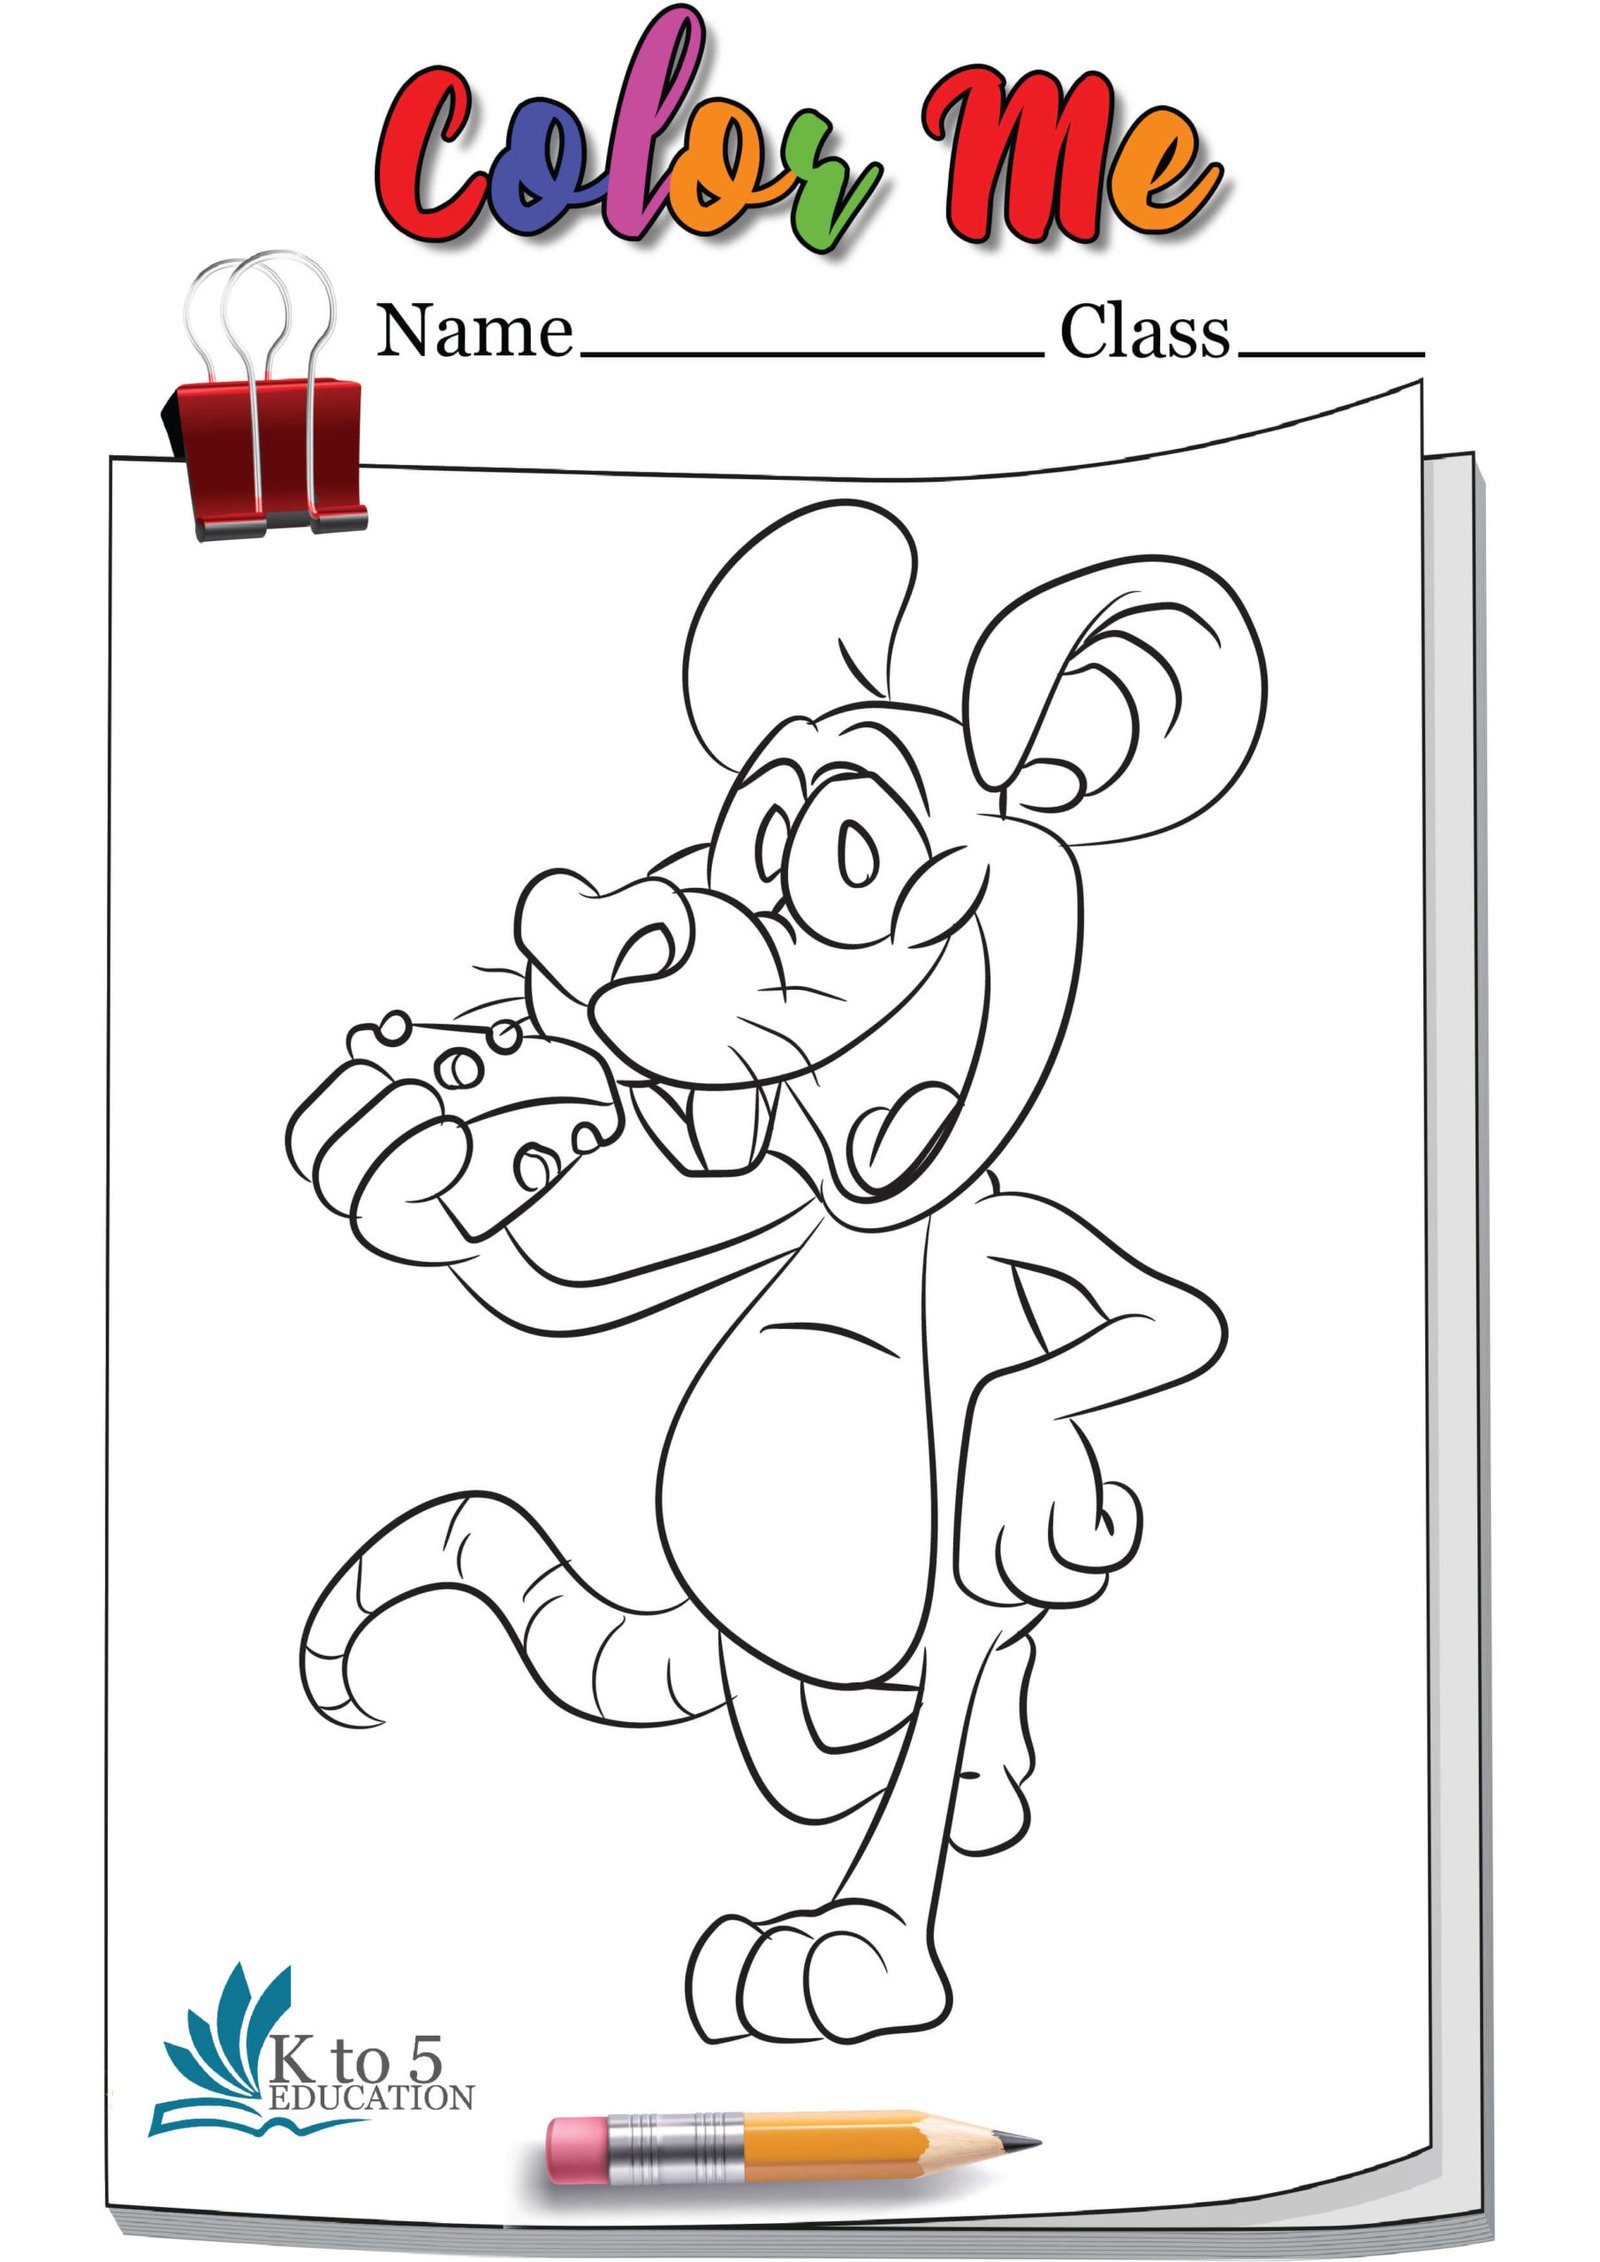 Happy Rat eating Cheese coloring Page worksheet